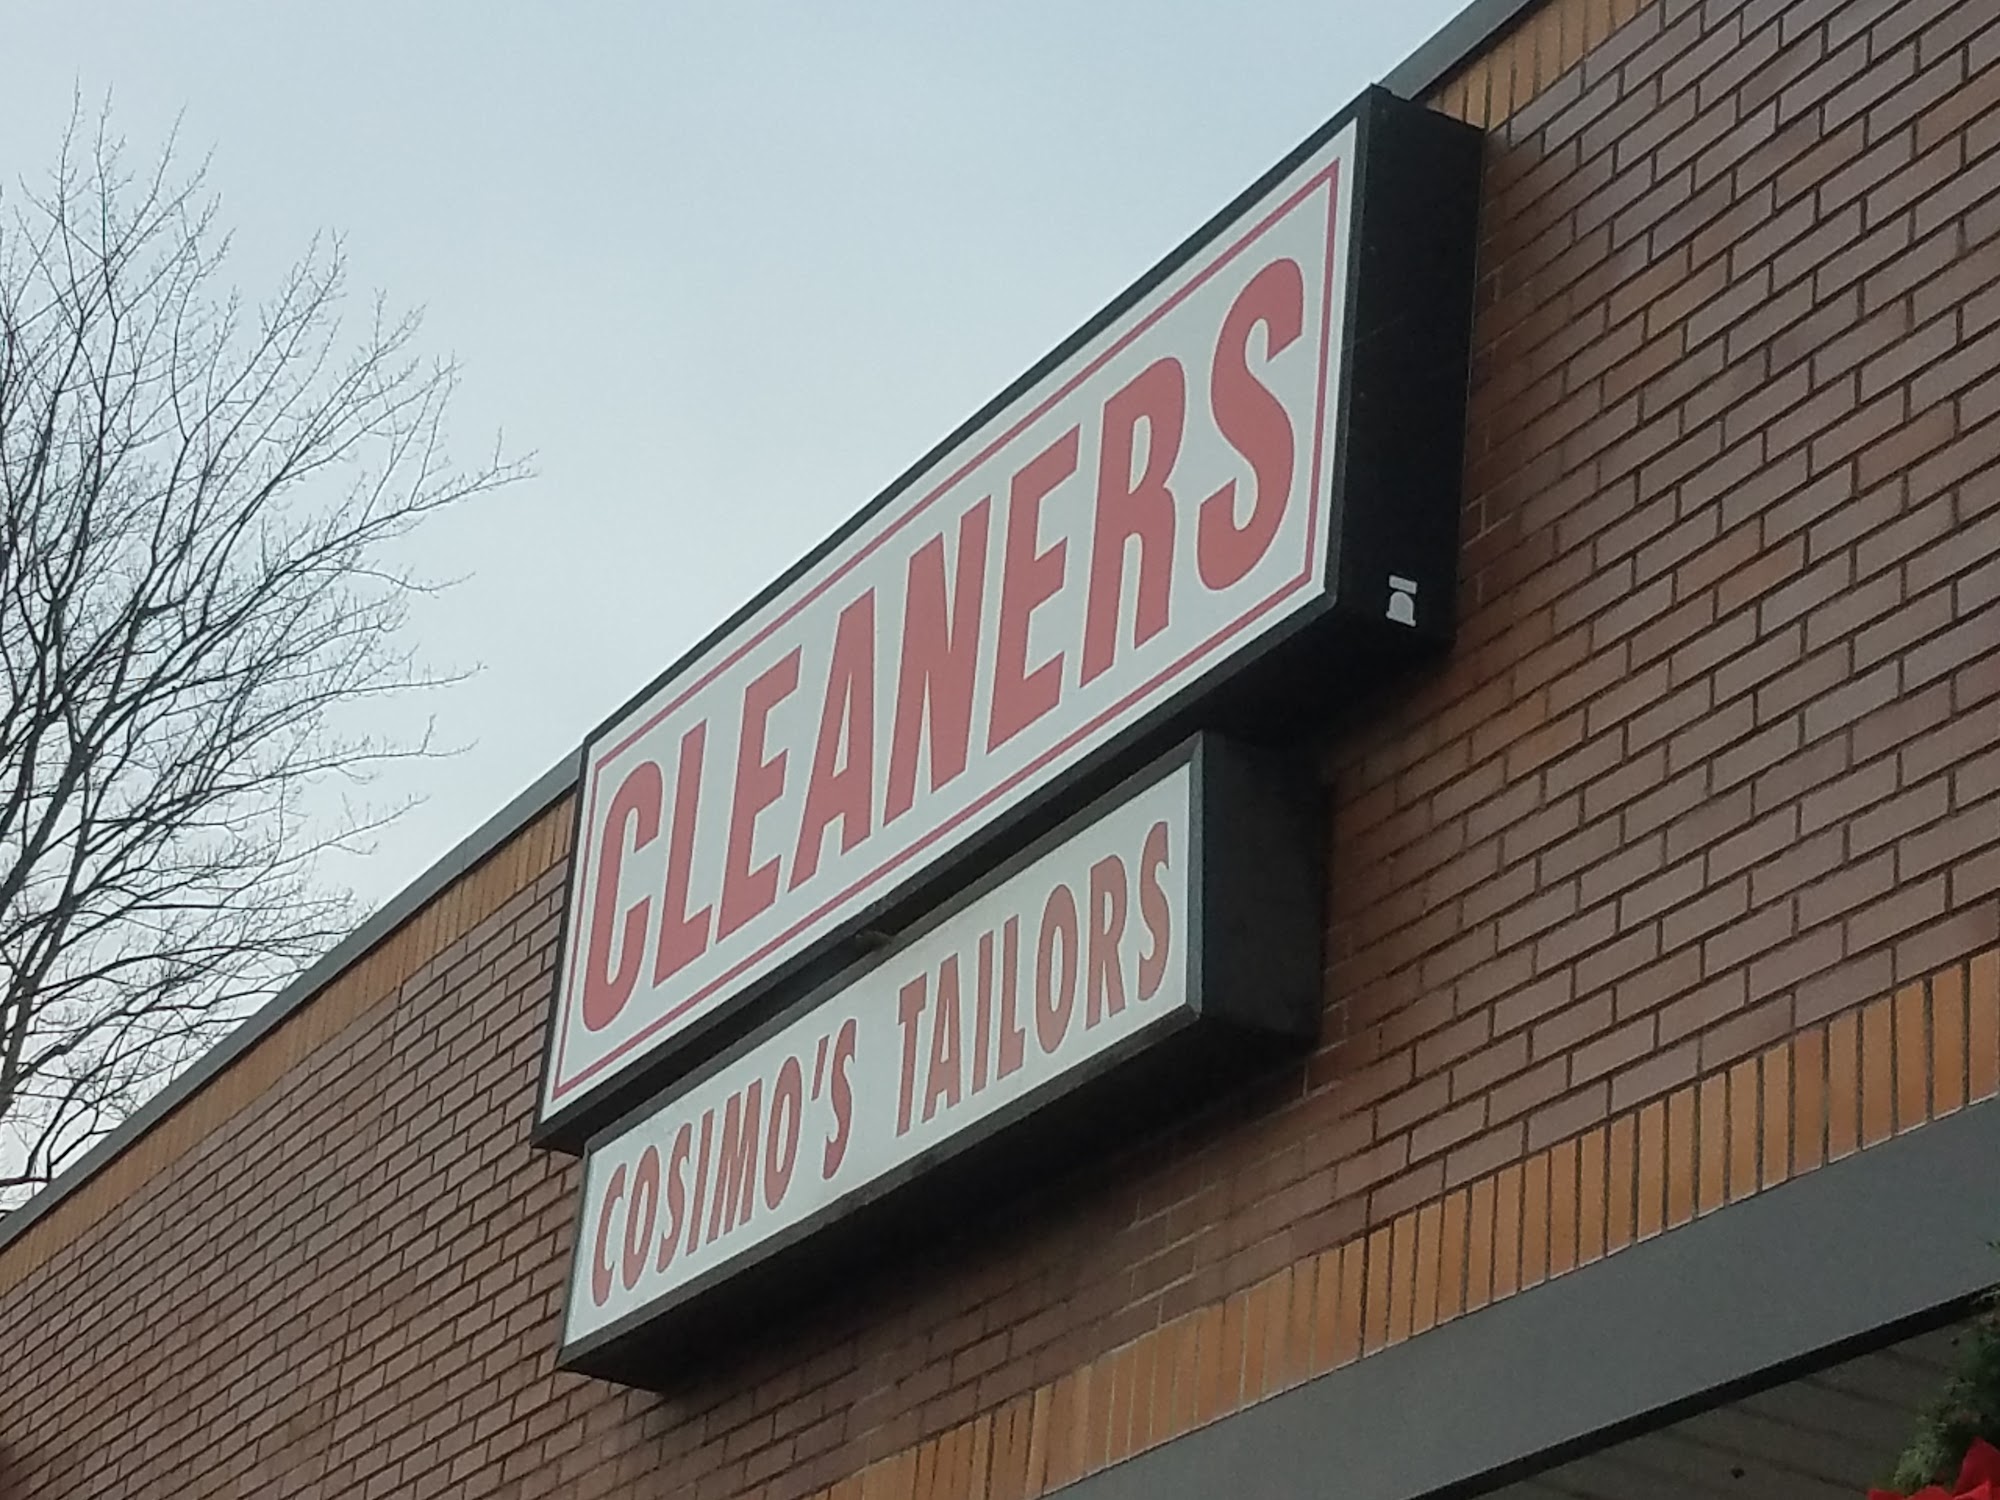 Cosimo's Cleaners & Tailoring